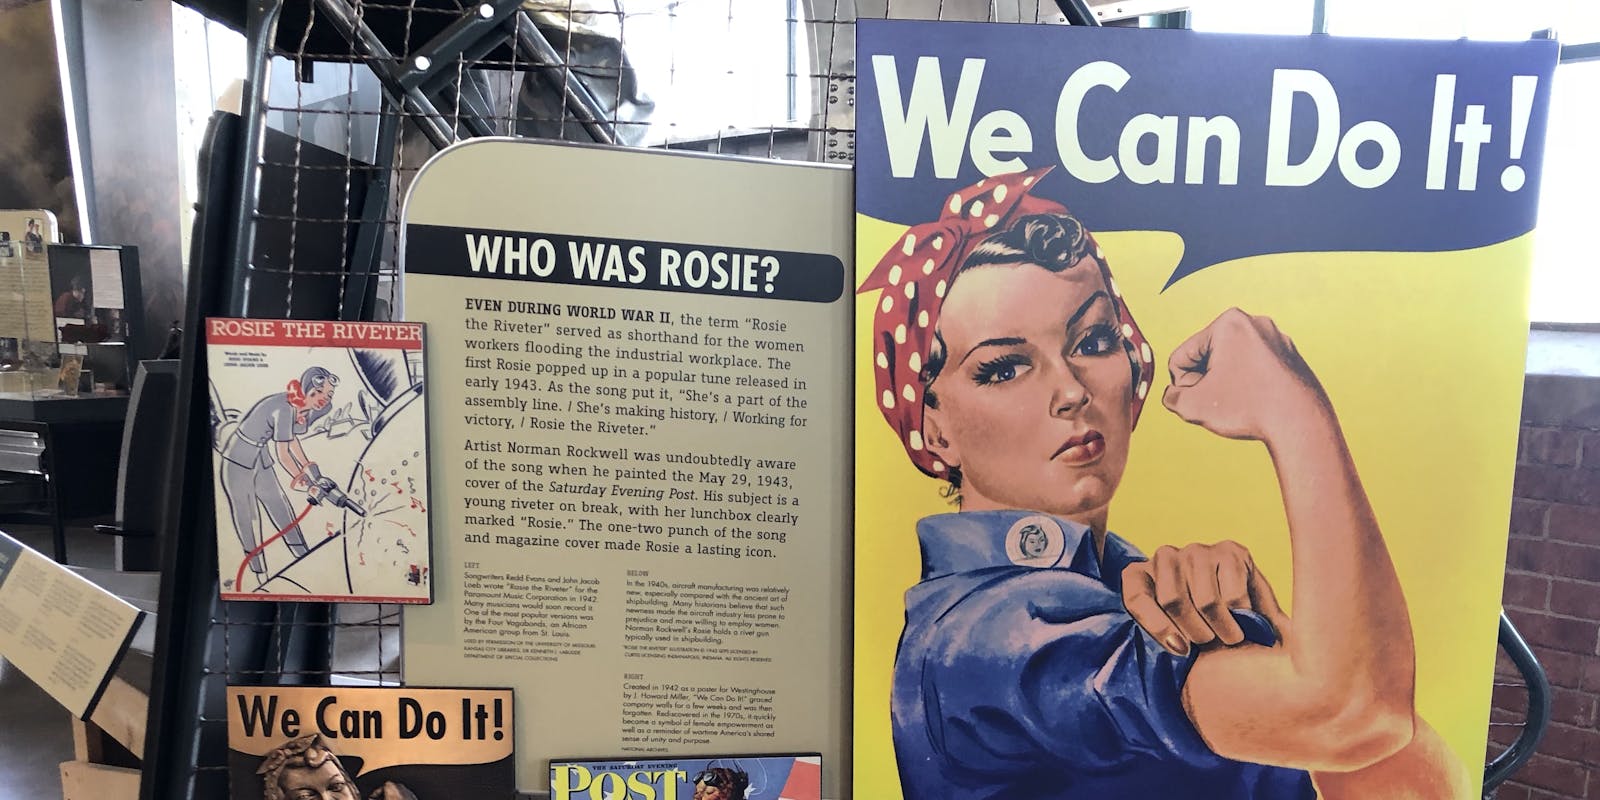 Rosie the Riveter posters in the museum.